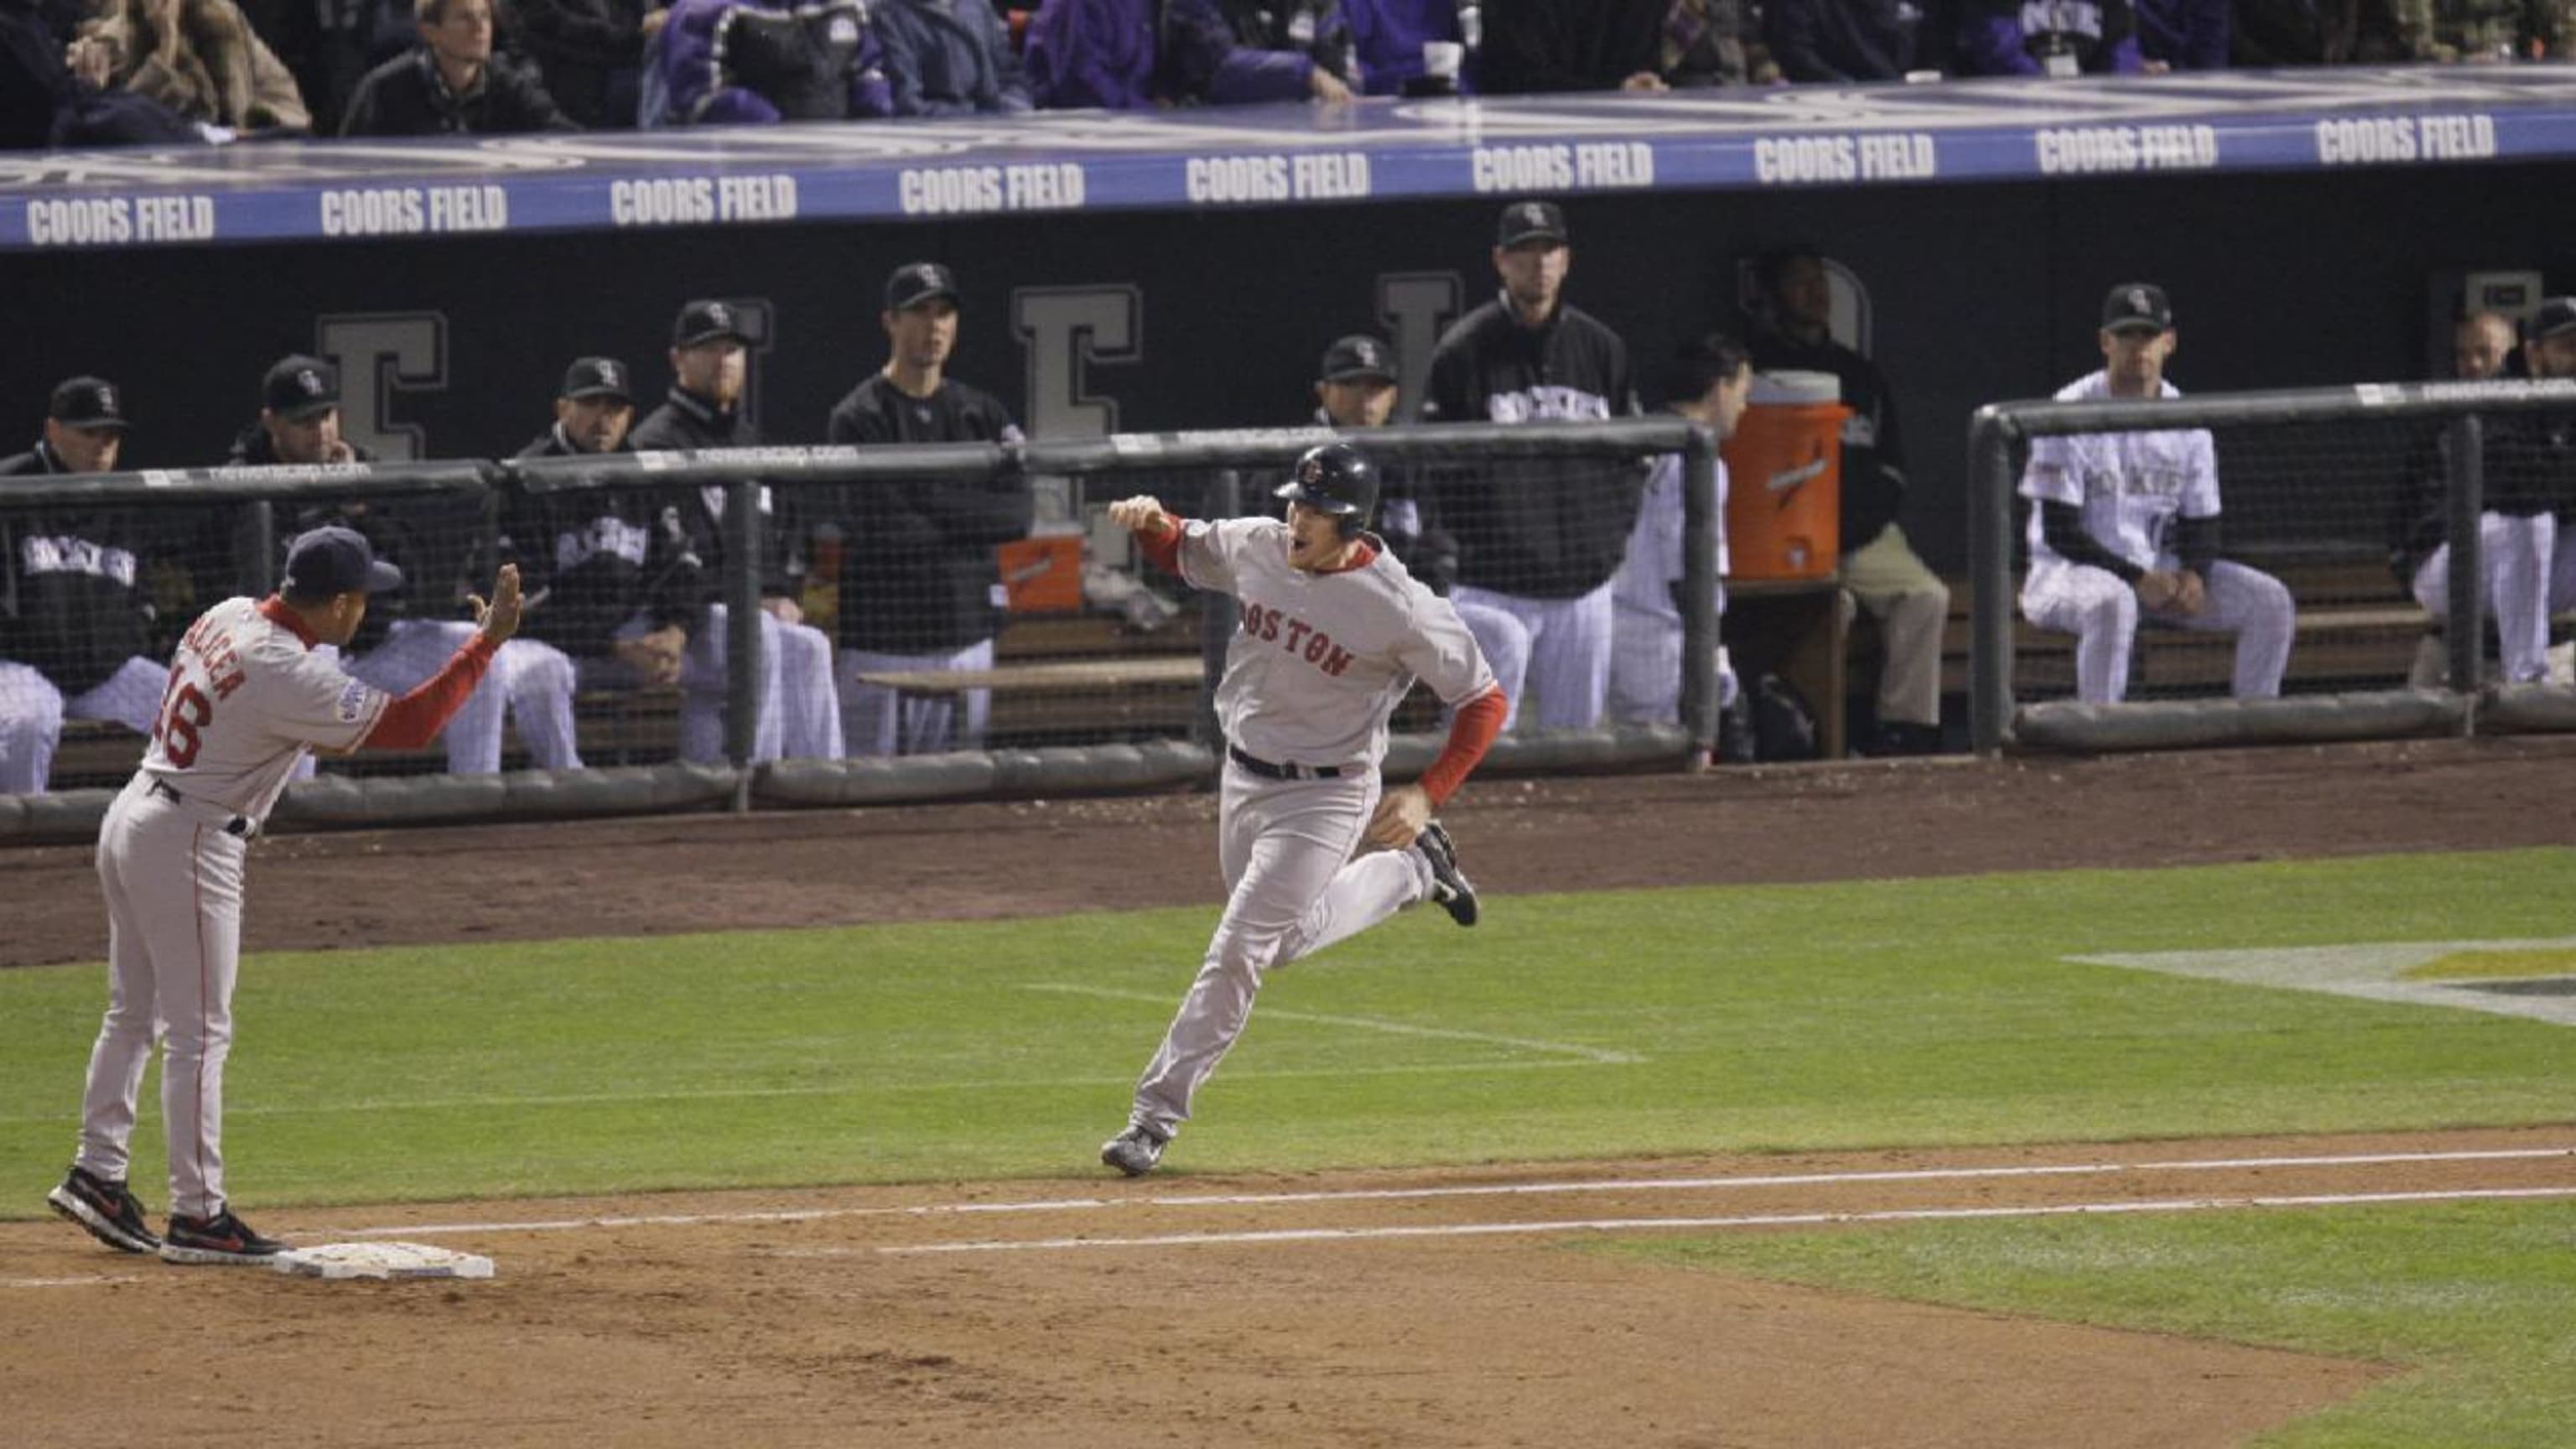 2007 World Series Game 3: Matt Holliday Home Run, Matt Holliday was clutch  during game 3 of the 2007 World Series., By Colorado Rockies Highlights